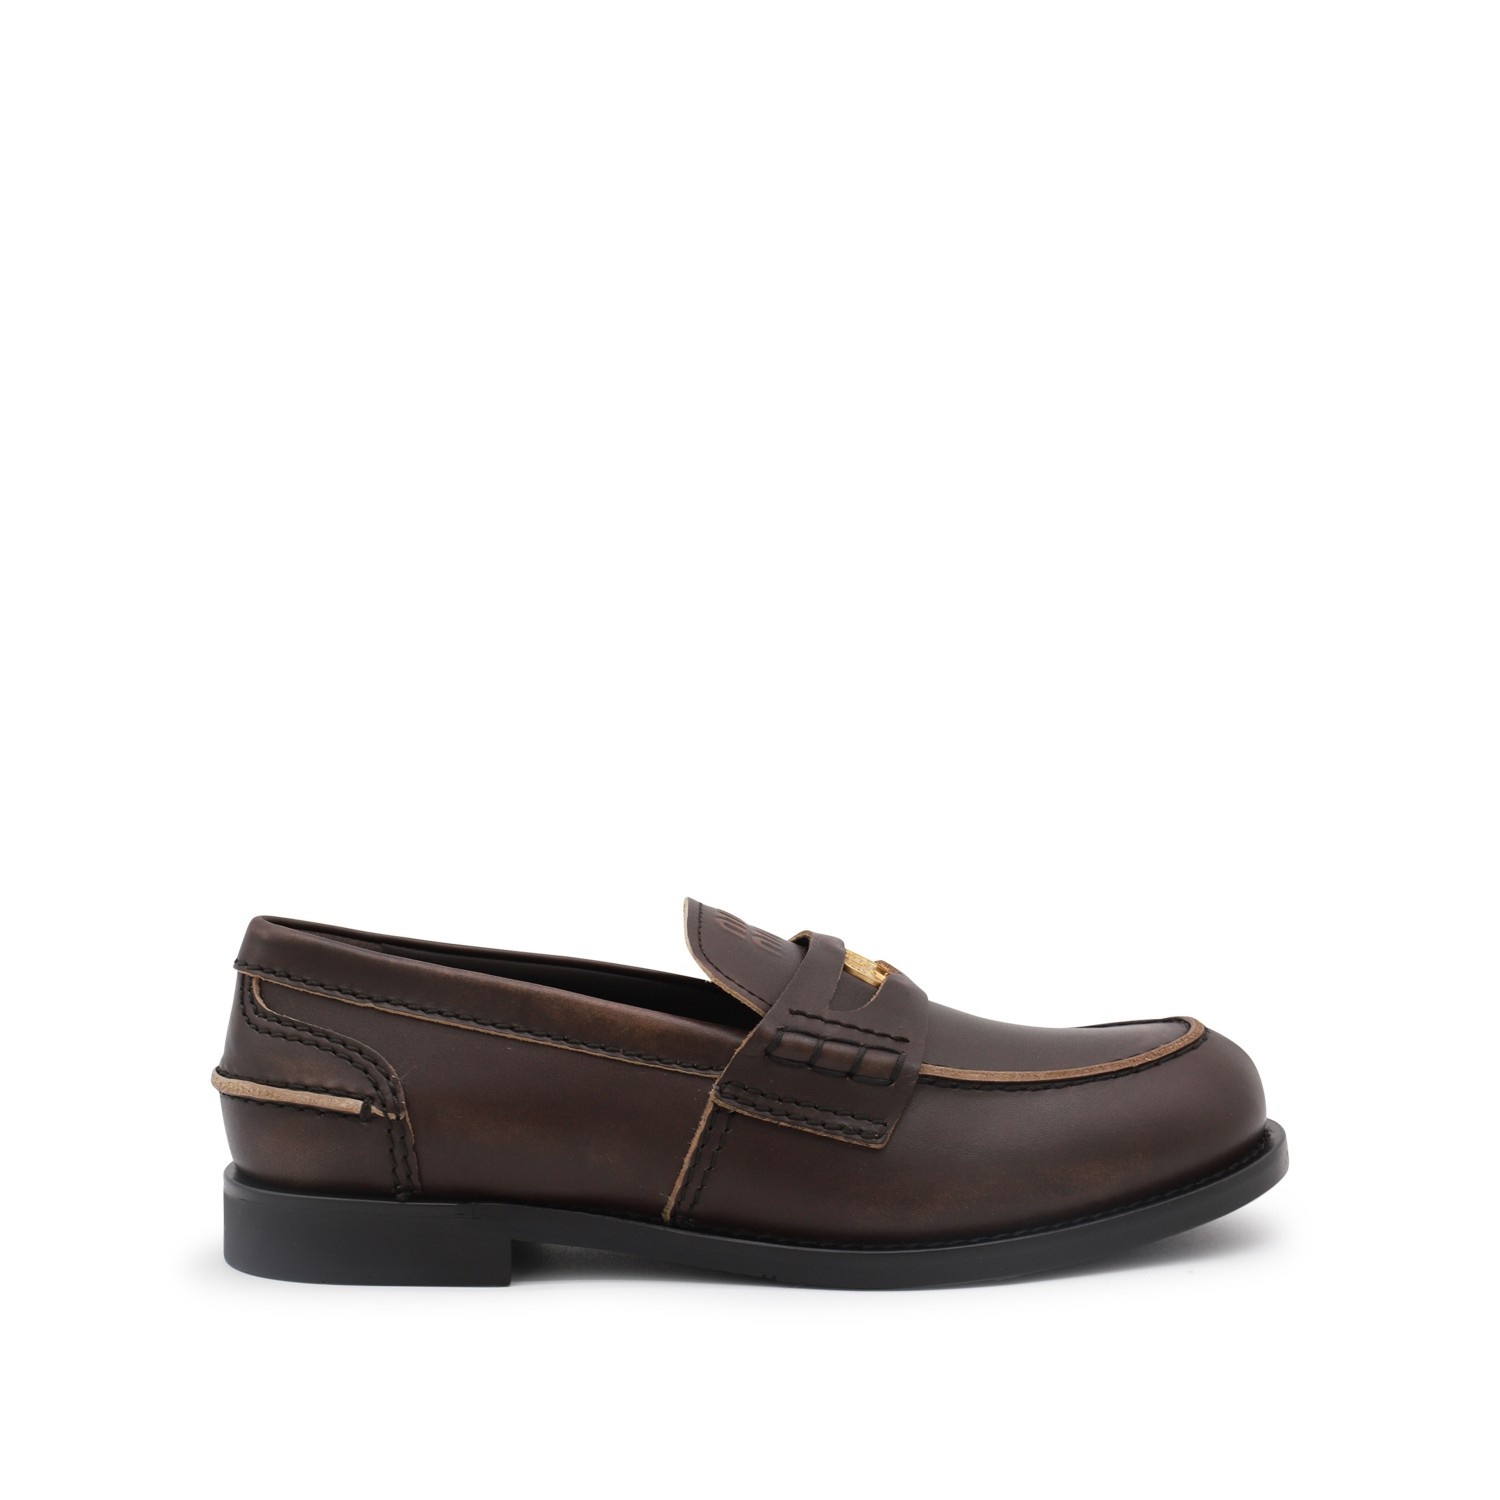 BROWN LEATHER LOAFERS - 1